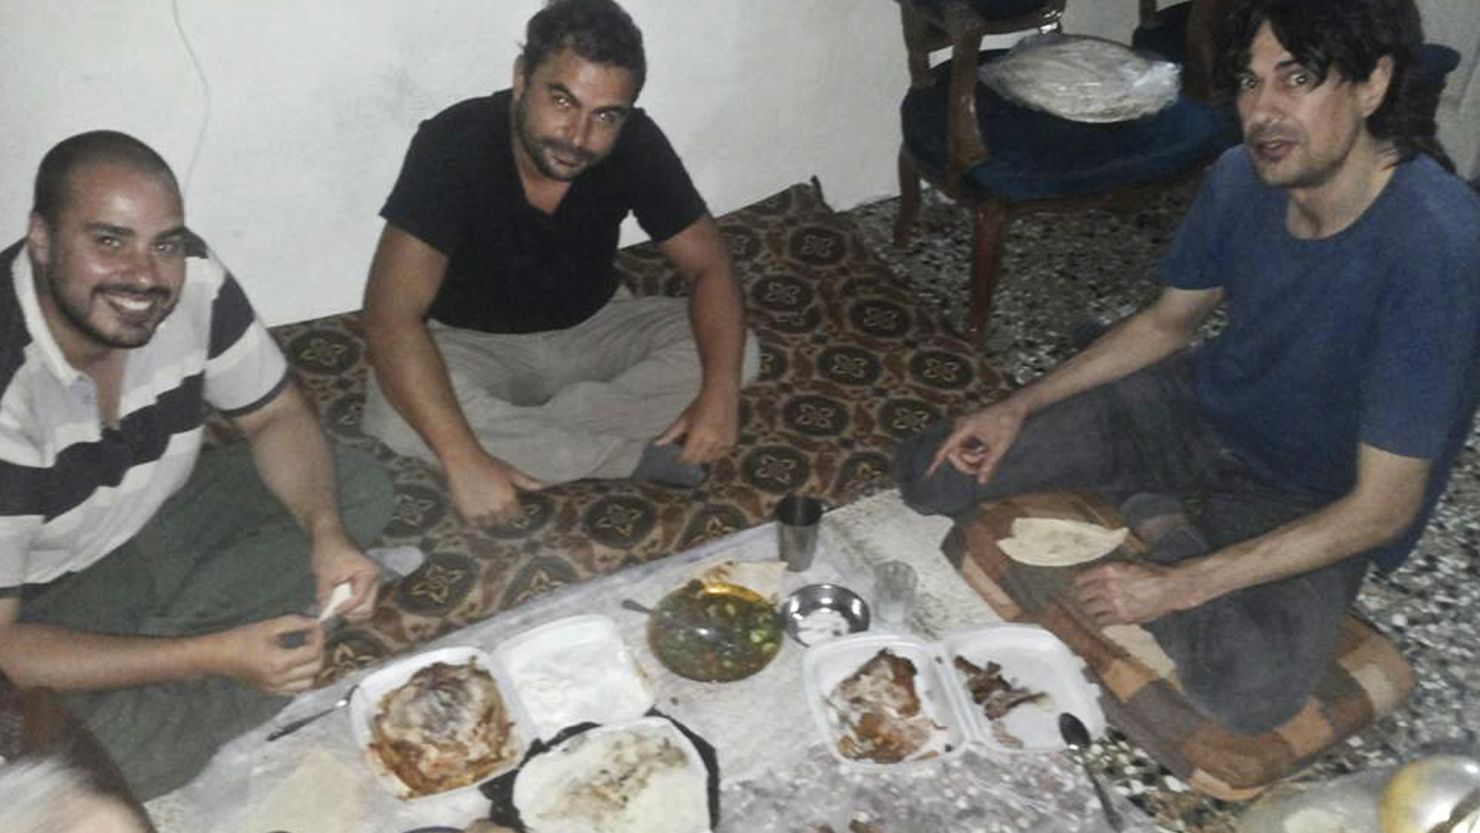 An image posted on Facebook on Saturday, July 11, 2015, shows Spanish freelance journalists Antonio Pampliega, left, Angel Sastre, center, and Jose Manuel Lopez, right, shortly after their arrival in Syria for a reporting trip. 